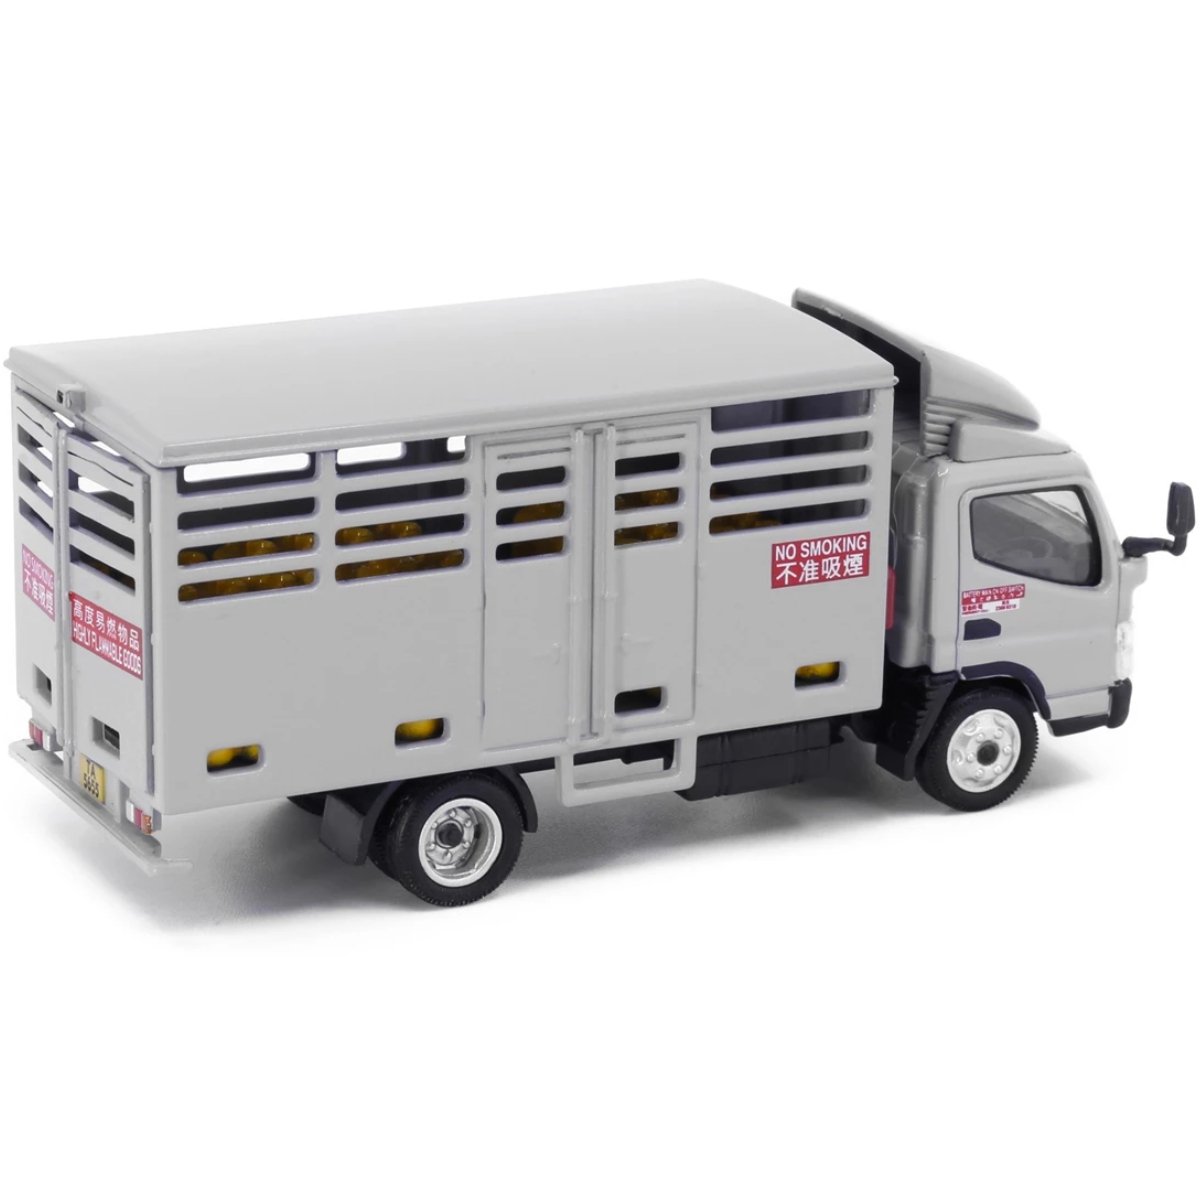 Tiny Models Mitsubishi Fuso Canter Bottled LPG Delivery Lorry (1:76 Scale) - Phillips Hobbies